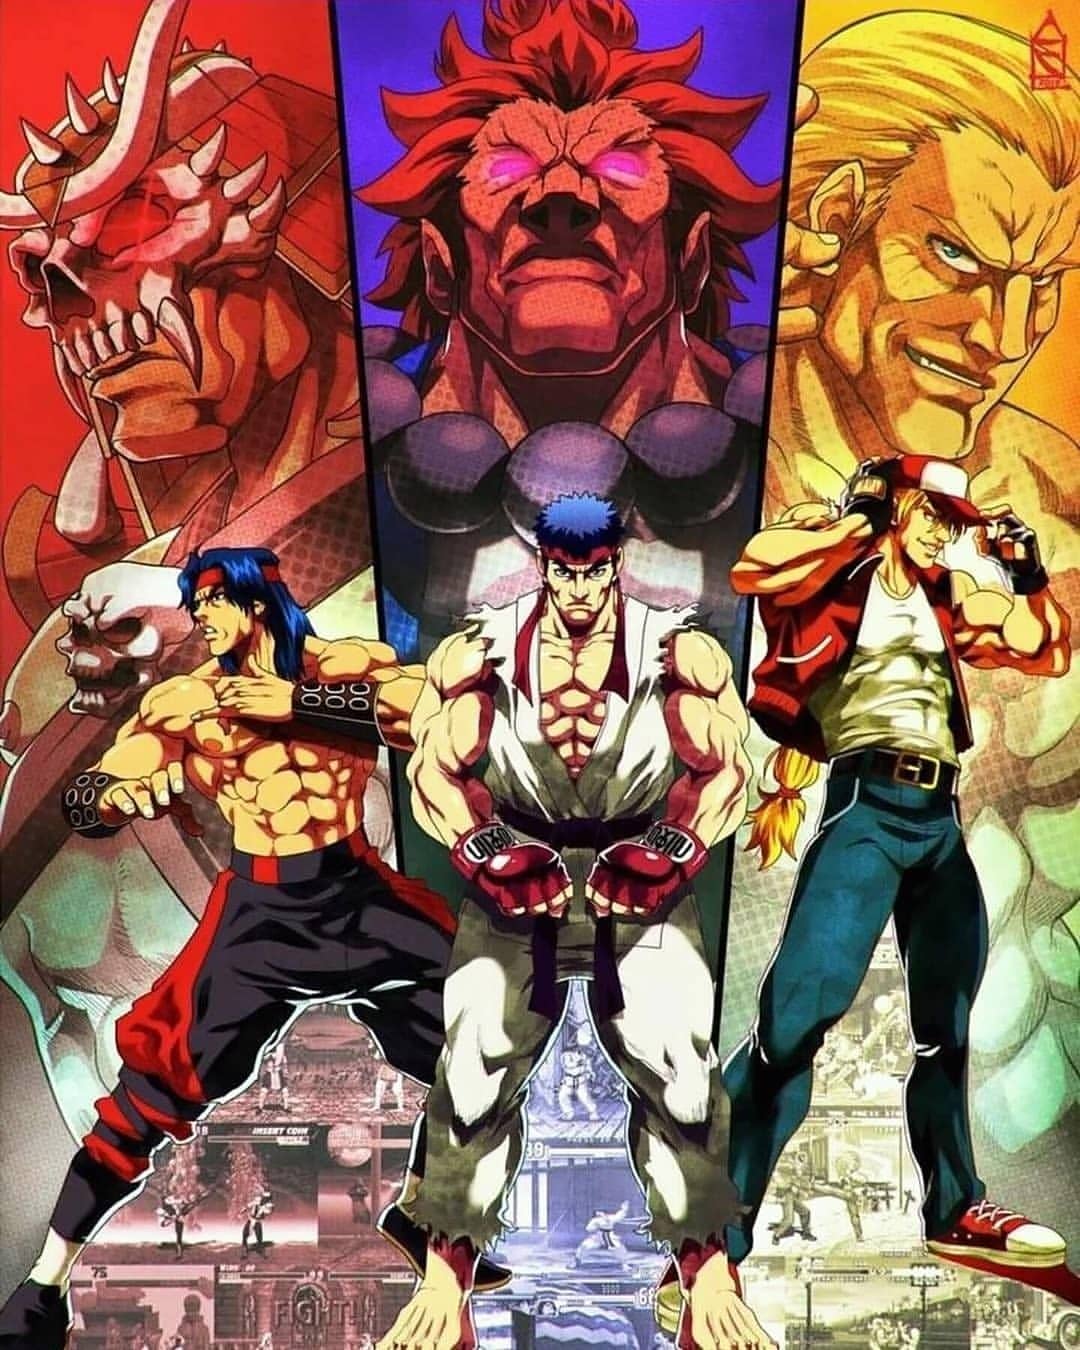 Geese Howard King of Fighters Anime Image Board